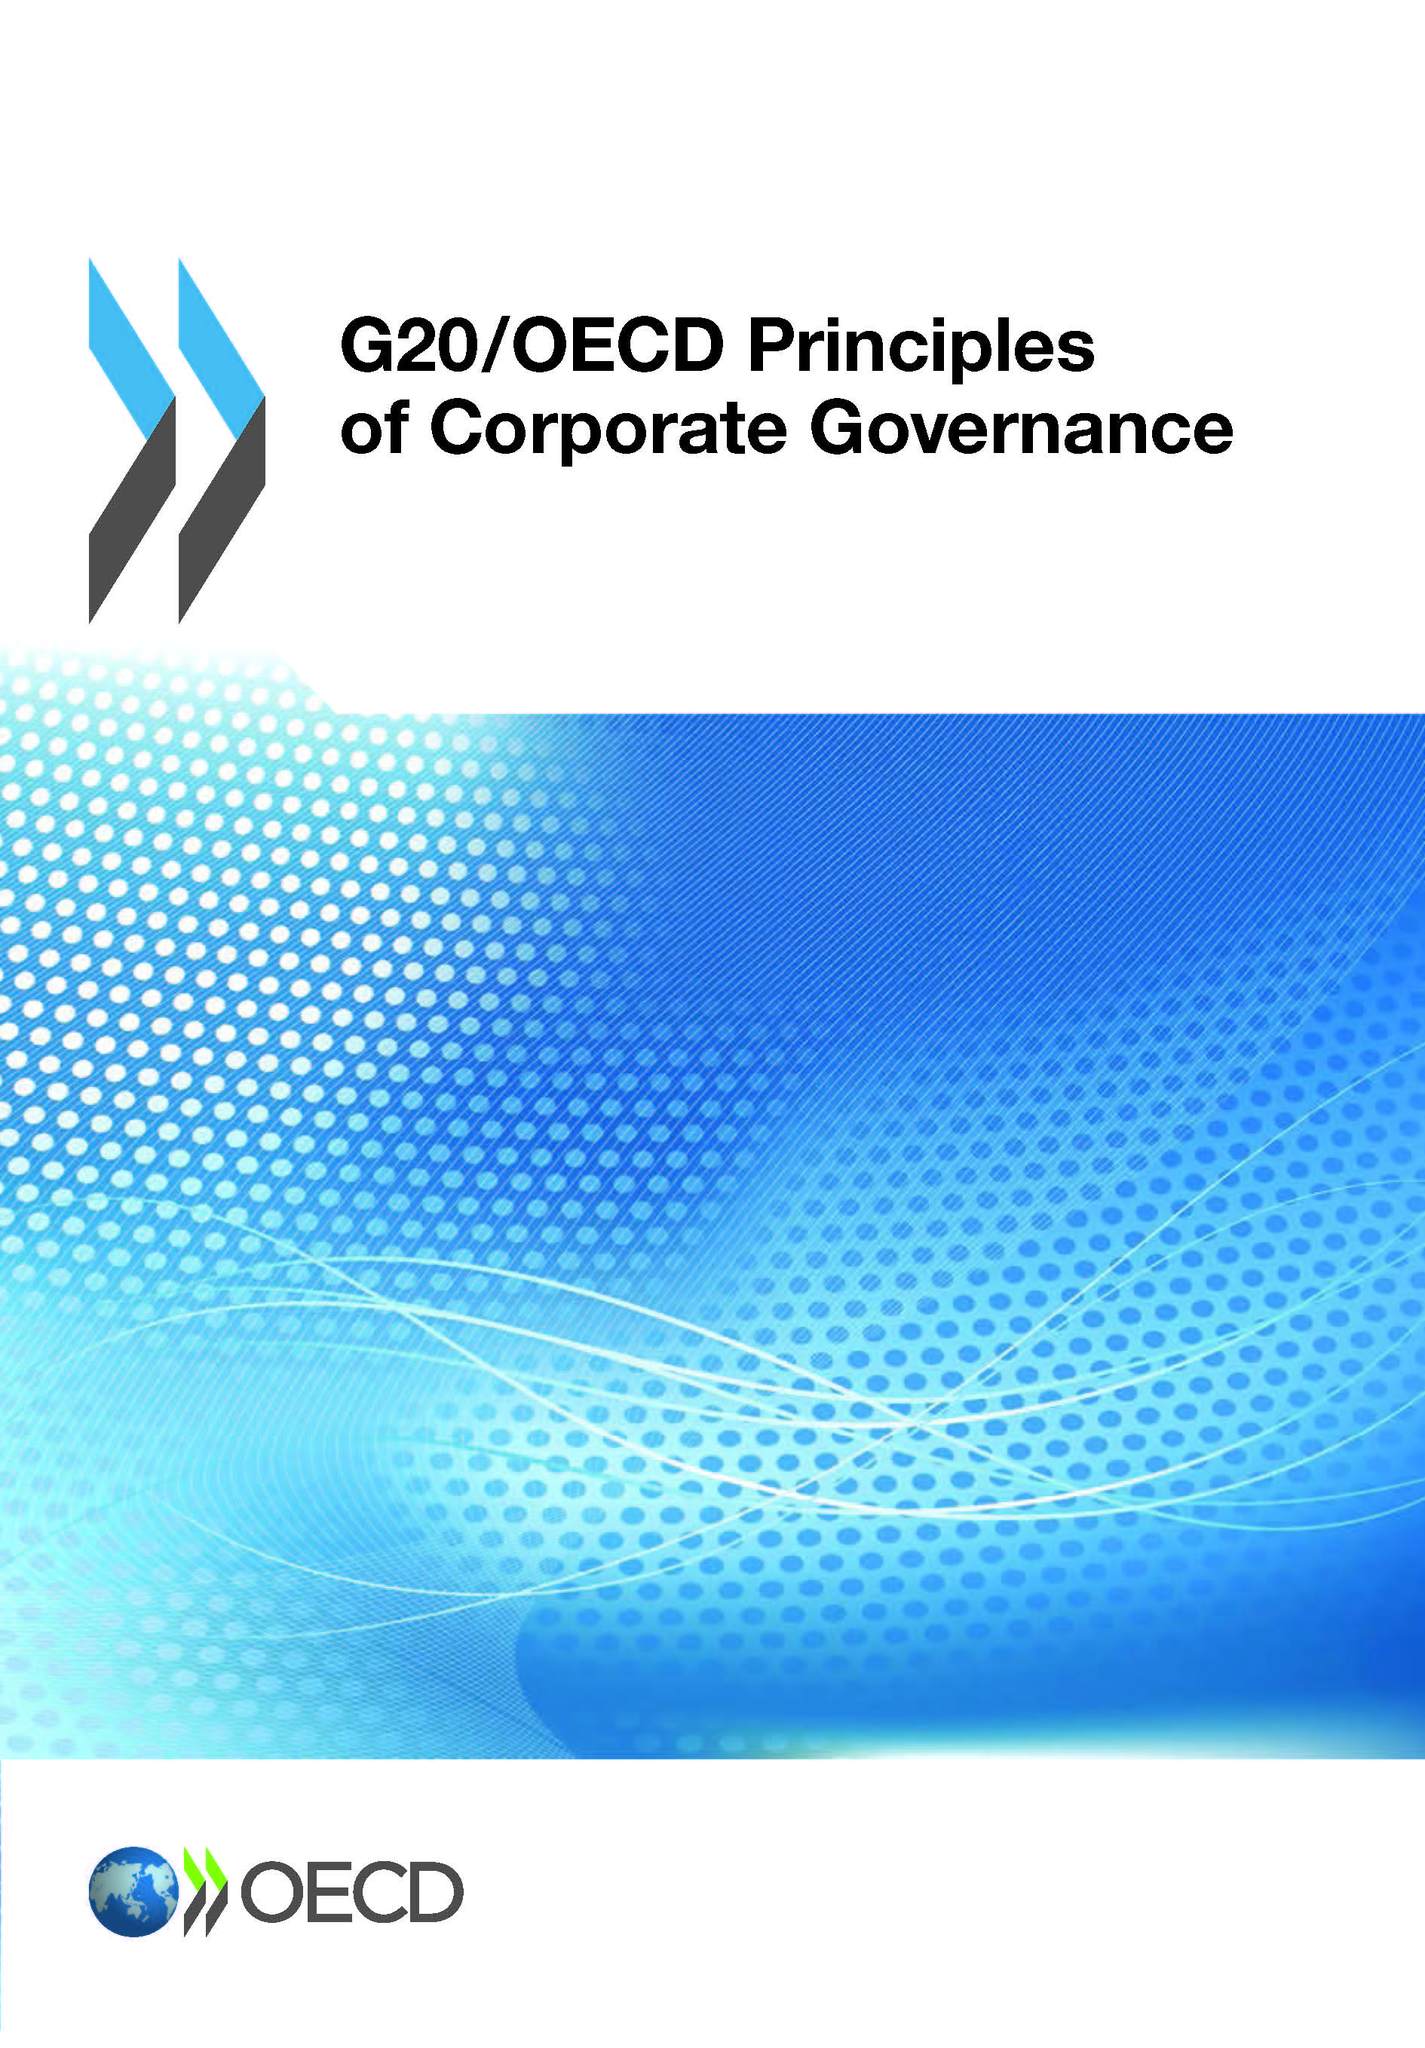 G20/OECD Principles of Corporate Governance